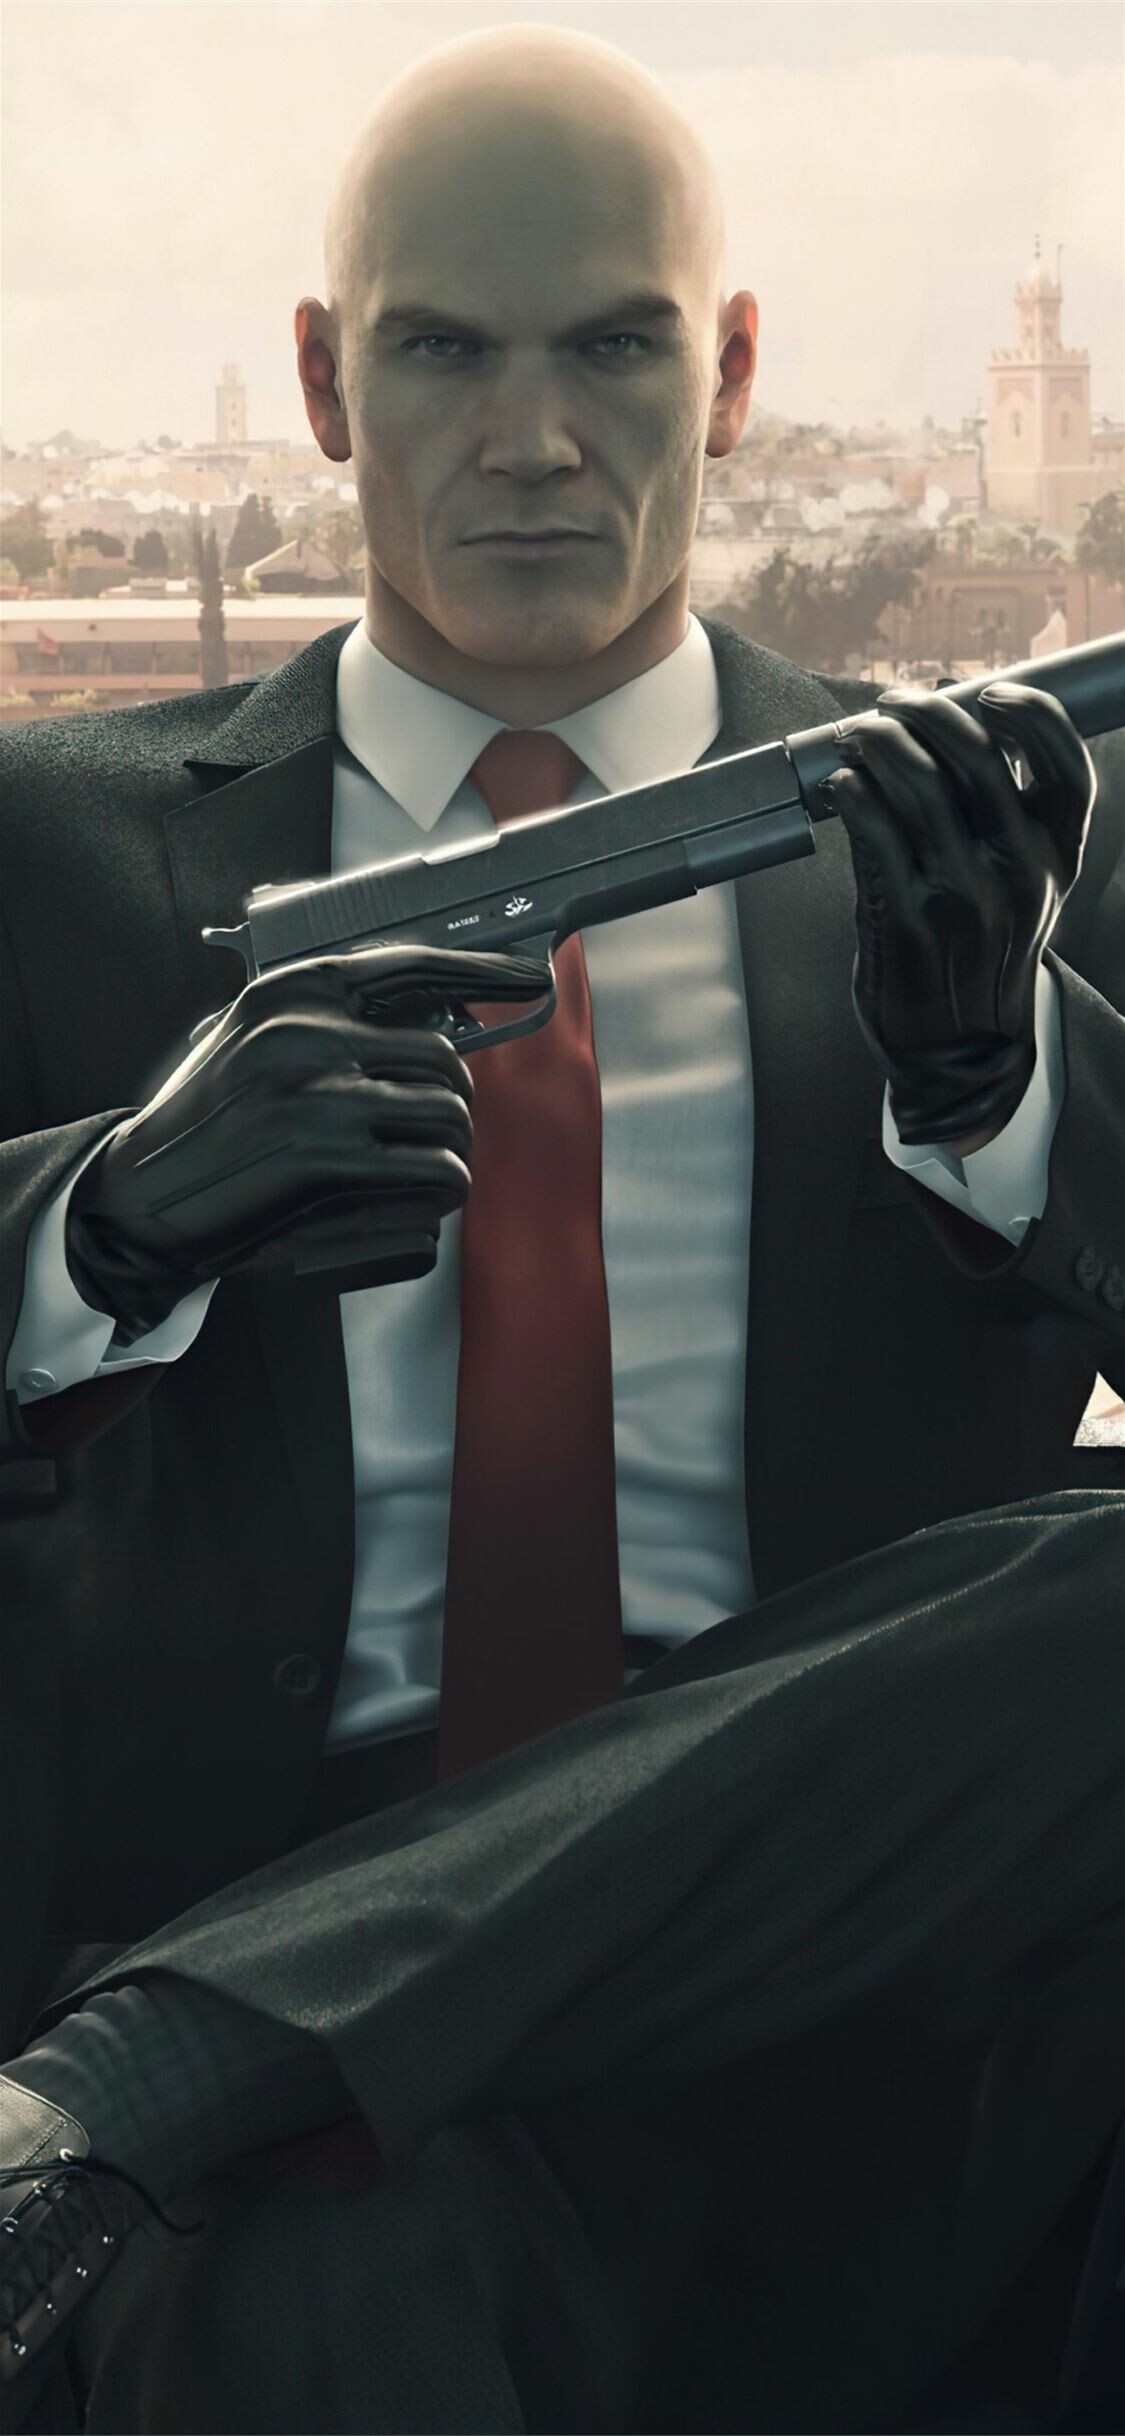 Hitman (Game): World of Assassination, Revealed at the PlayStation 5 reveal event in 2020. 1130x2440 HD Wallpaper.